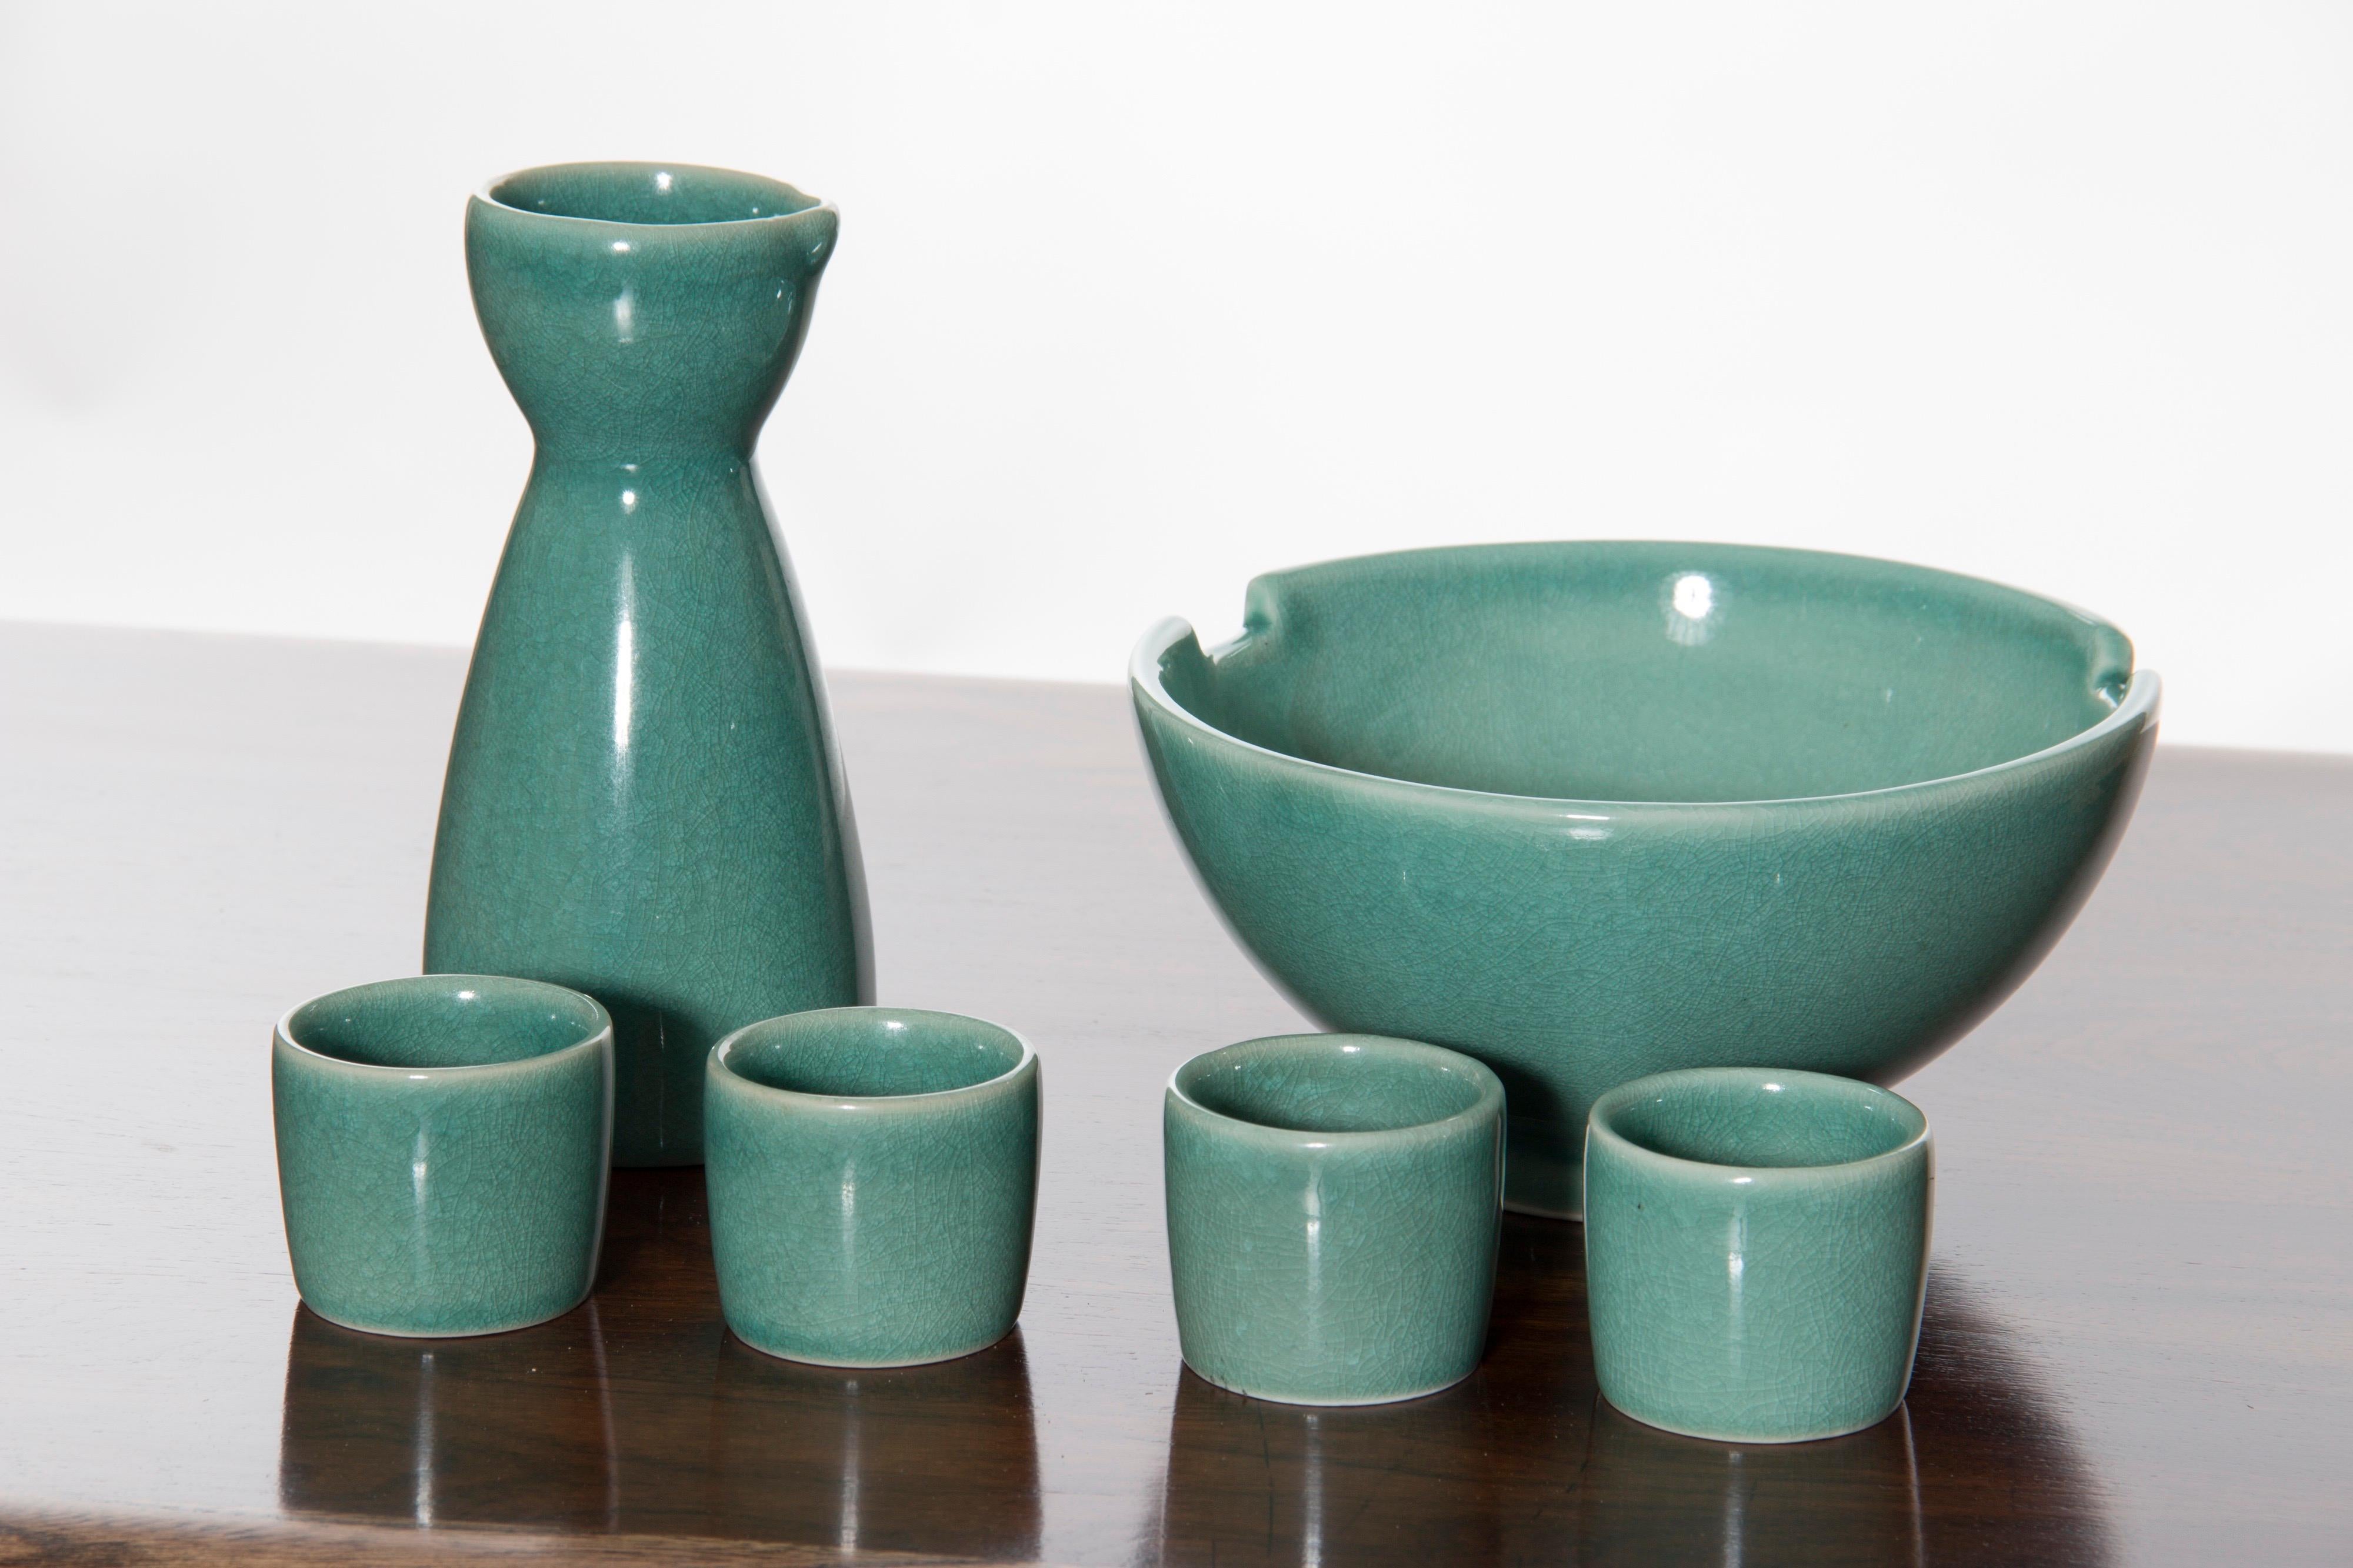 Vintage Turquoise ceramic sake set in perfect condition. Set includes one sake decanter with a tapered neck and rounded body called a tokkuri. The tokkuri is used at the table when the sake is transferred from the bottle. Set includes also four